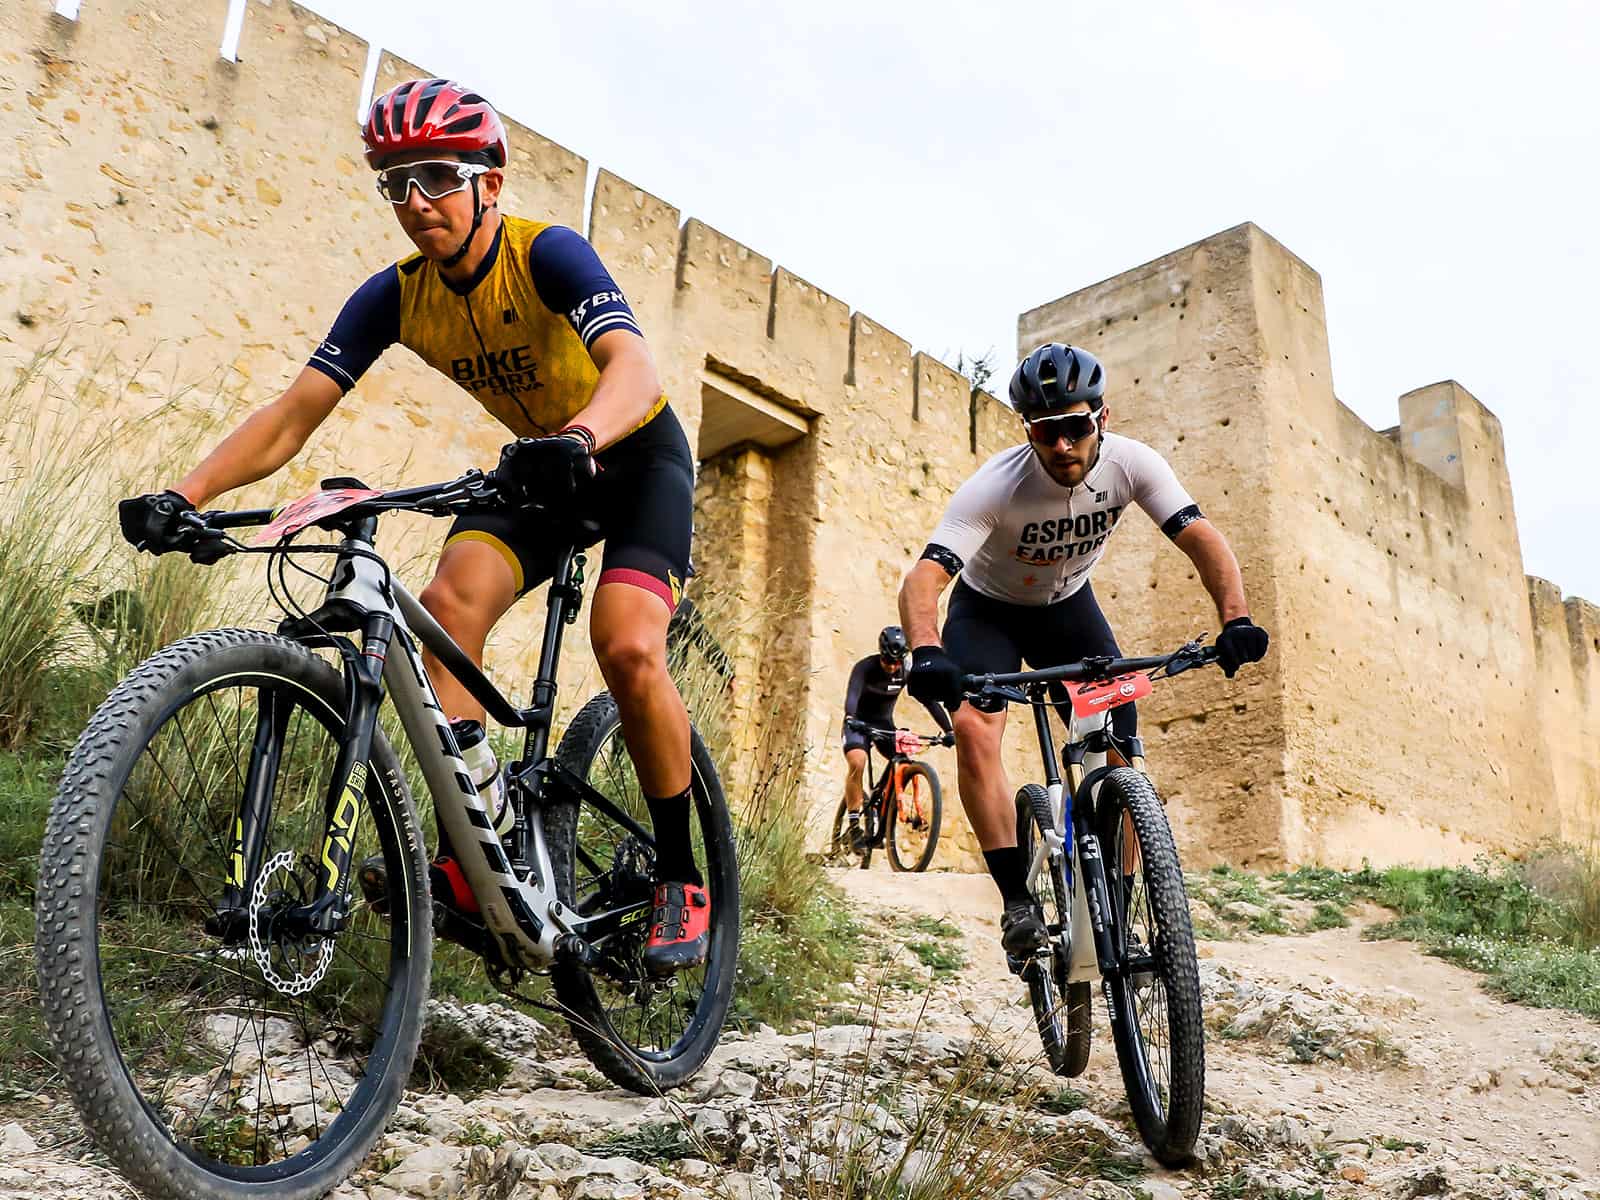 GSPORT HOSTS THE XÀTIVA MTB RIDE OF THE MES ESPORT CIRCUIT